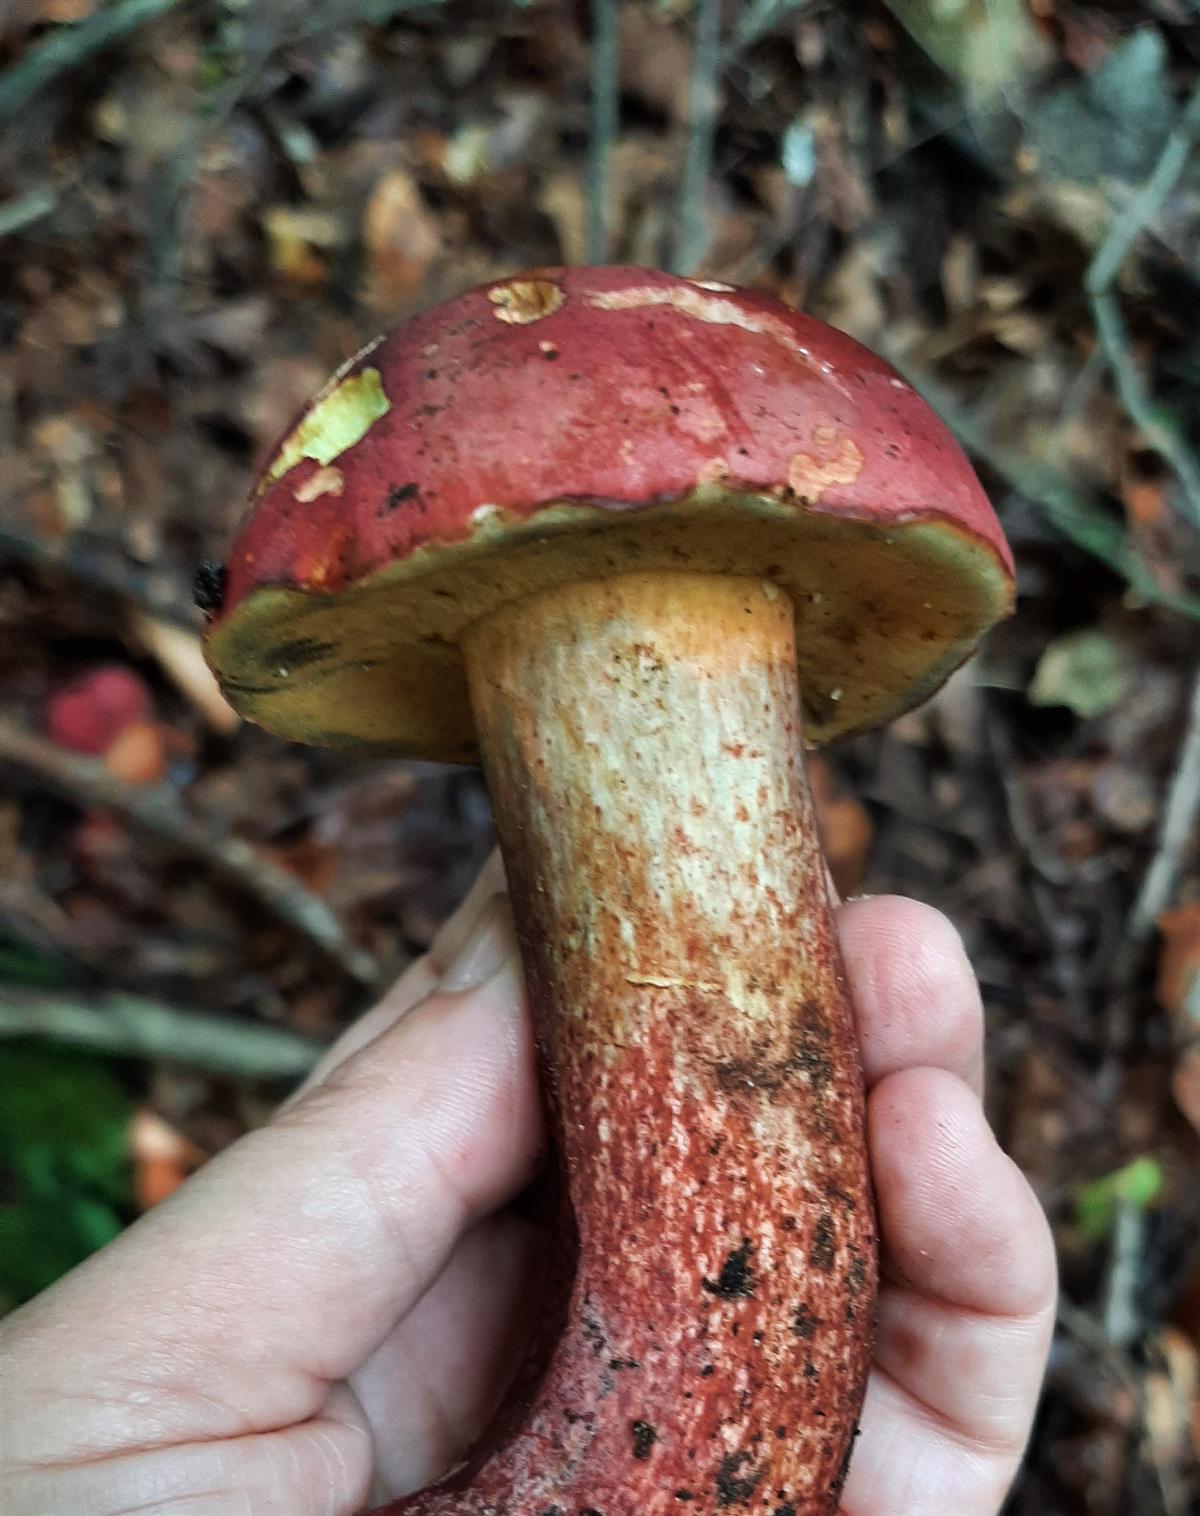 Bolete with a colorful stem